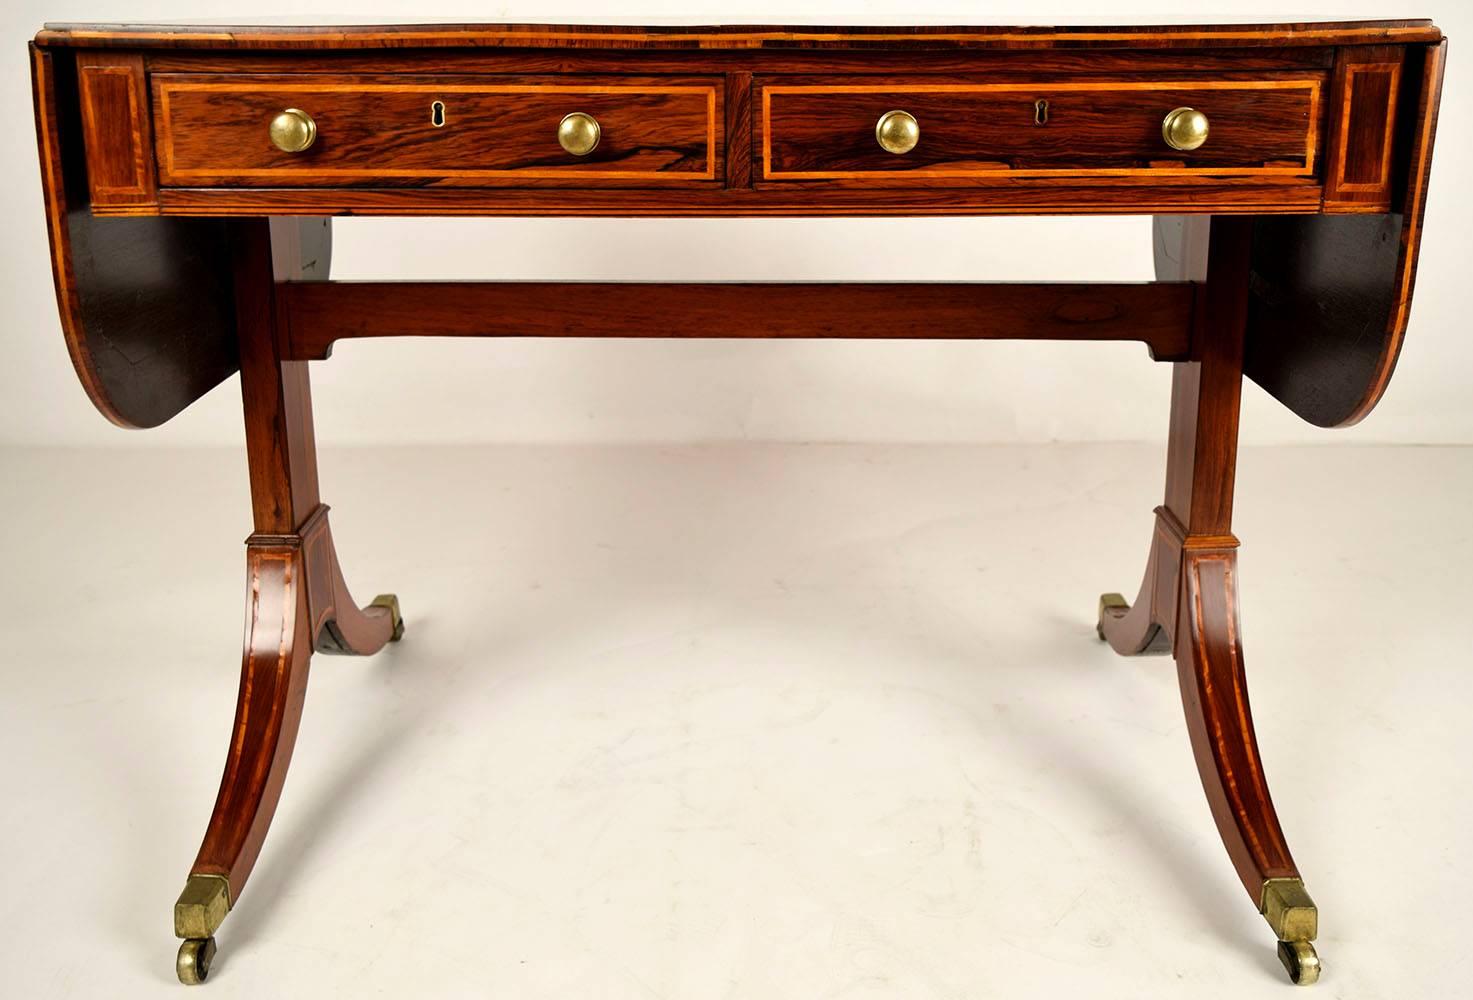 This is a 1870s English sofa table. Mahogany wood was used to make this beautiful desk, has two side leaves that lift up to make it longer. Has elegant inlaid design all throughout the top, sides, front and legs. Features two front drawers with deal